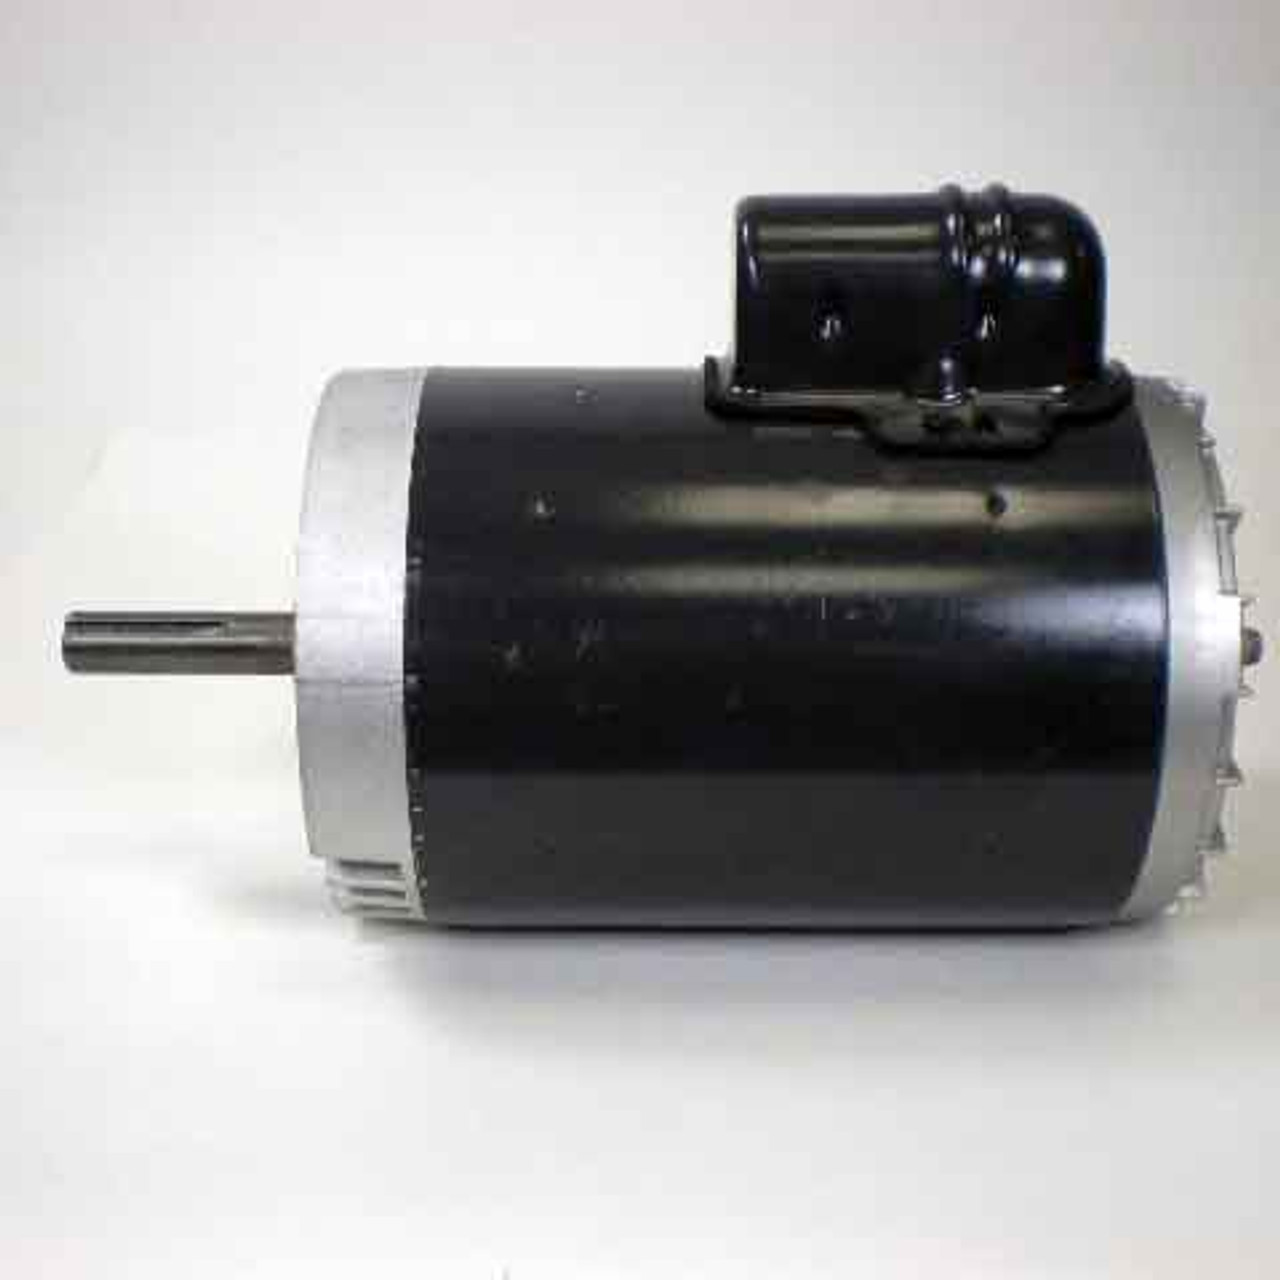 1 HP FAN MOTOR 230V 1PH 850RPM DIRECT DRIVE - Northeast Agri Systems